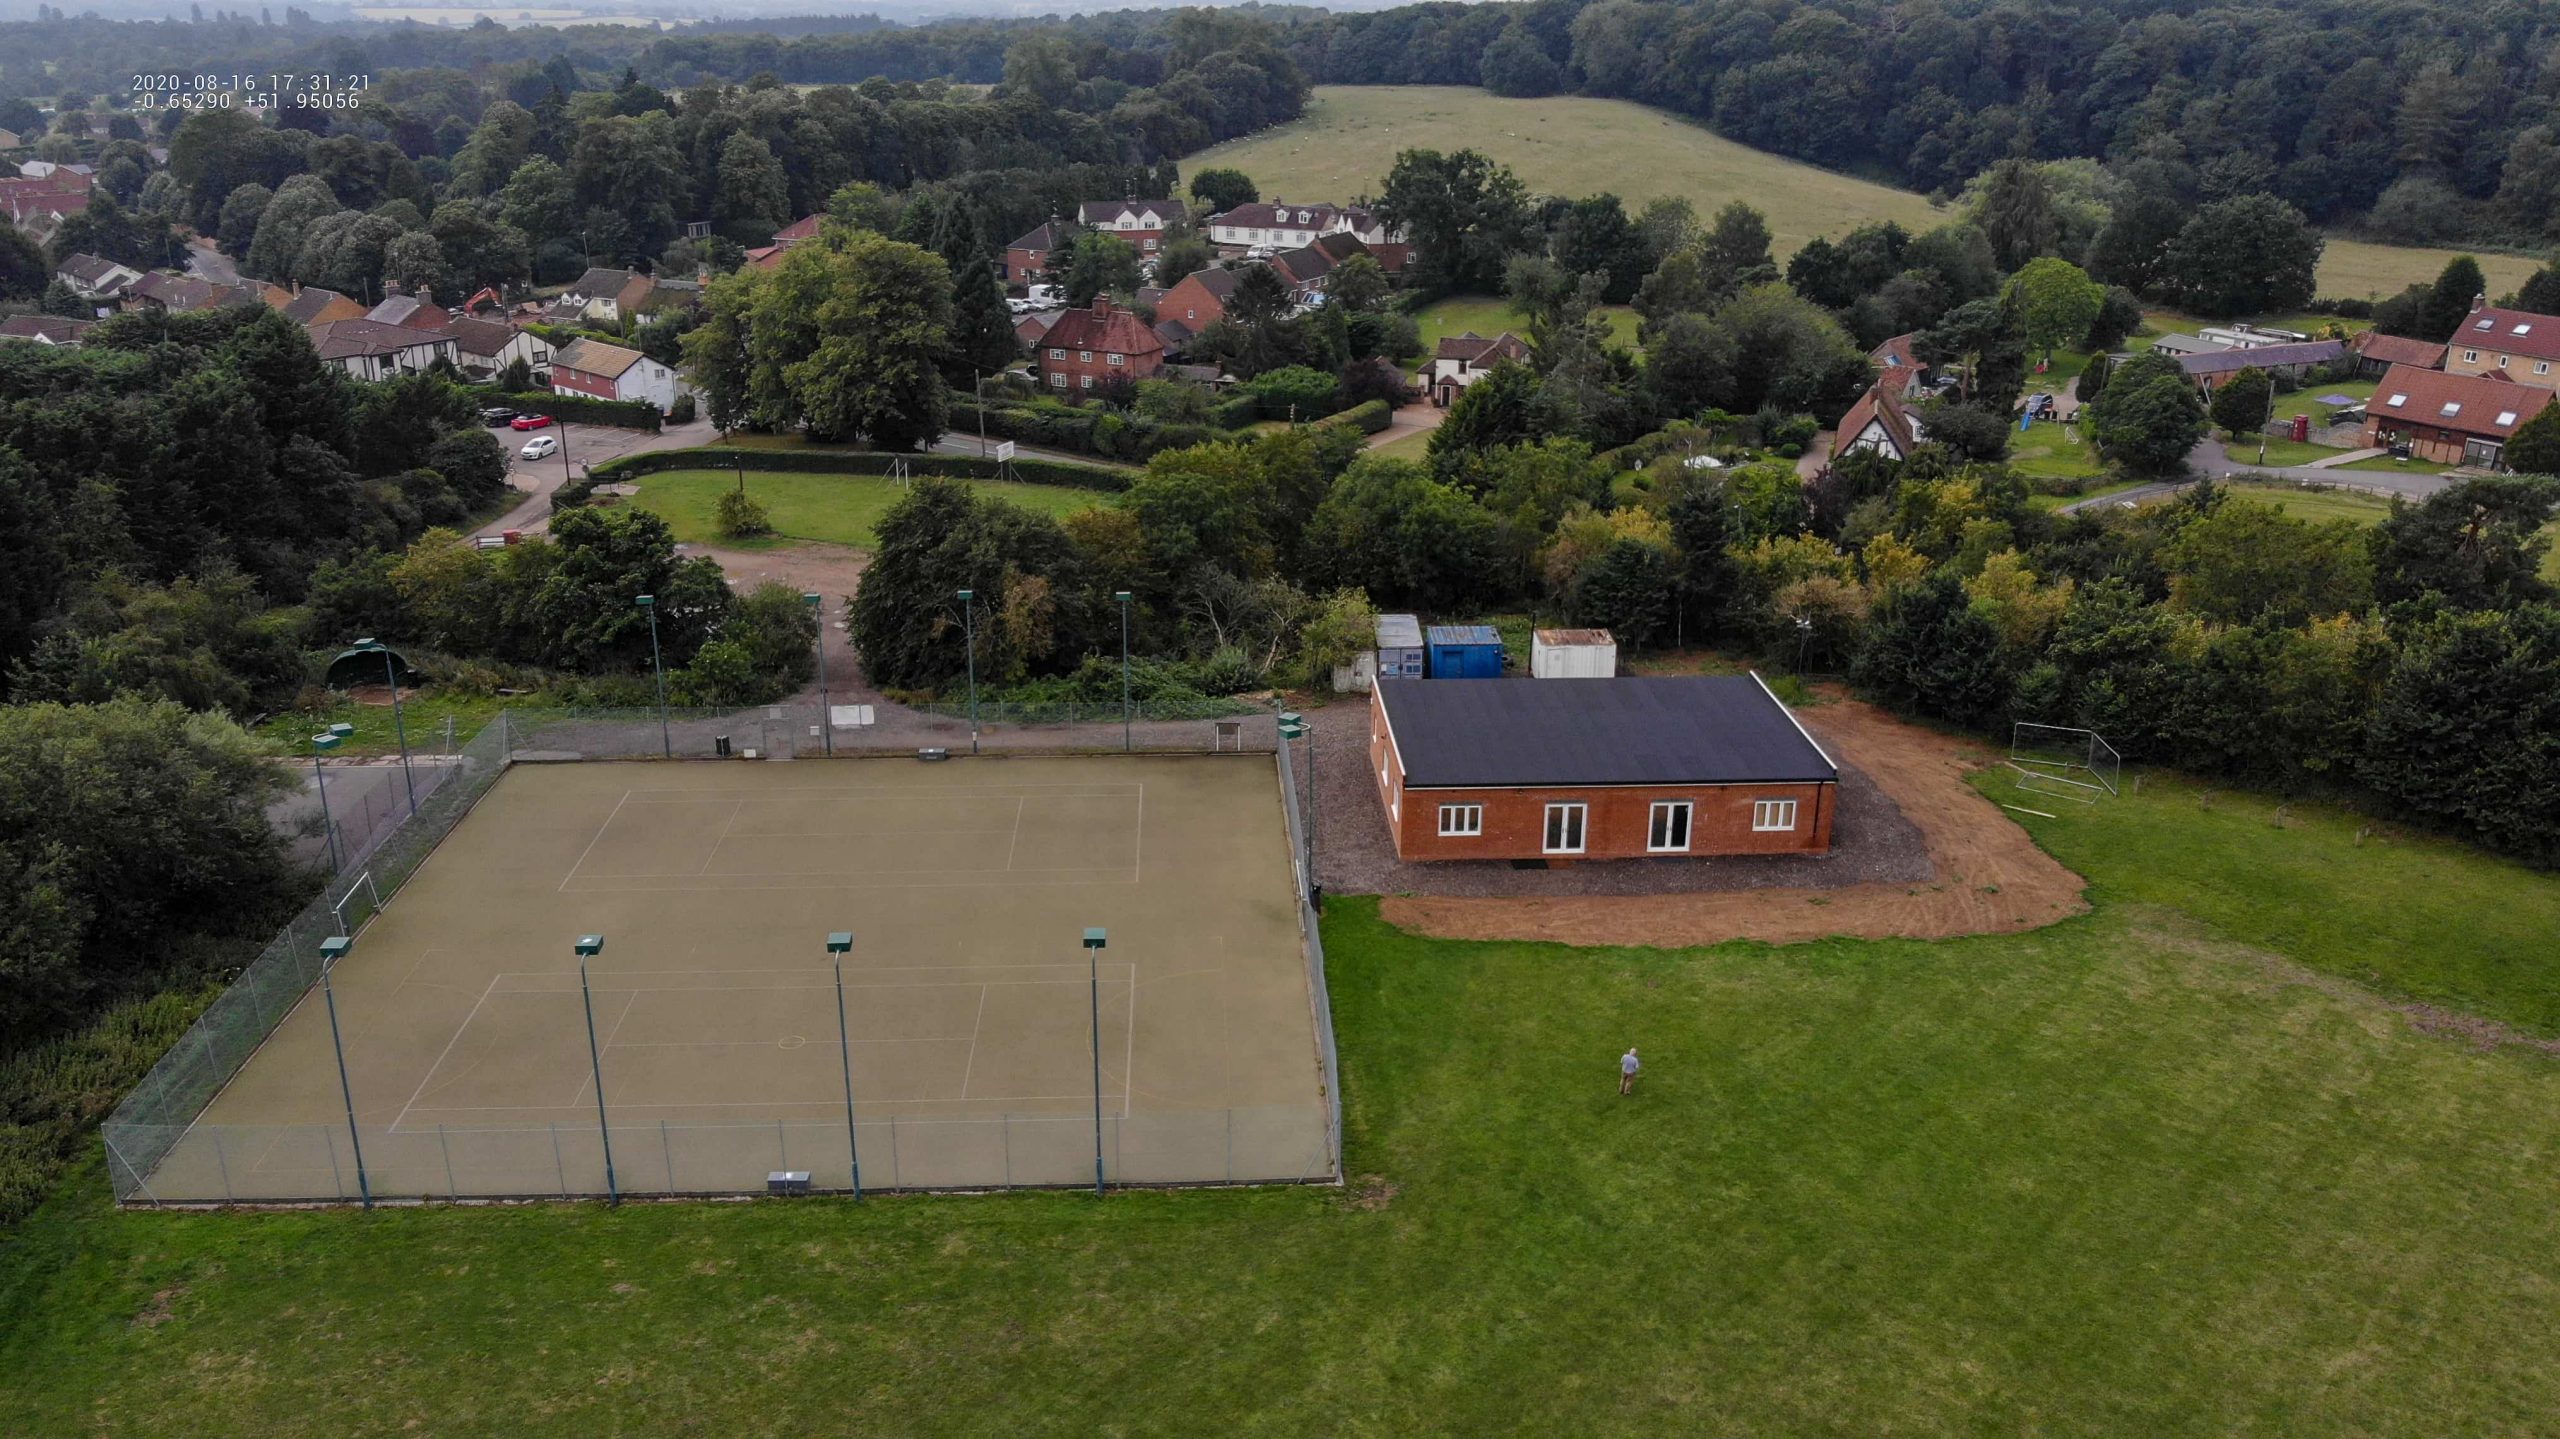 Aerial view of Bryants Lane Tennis Court - image by kind permission of James Hoare of LHW Partnership LLP